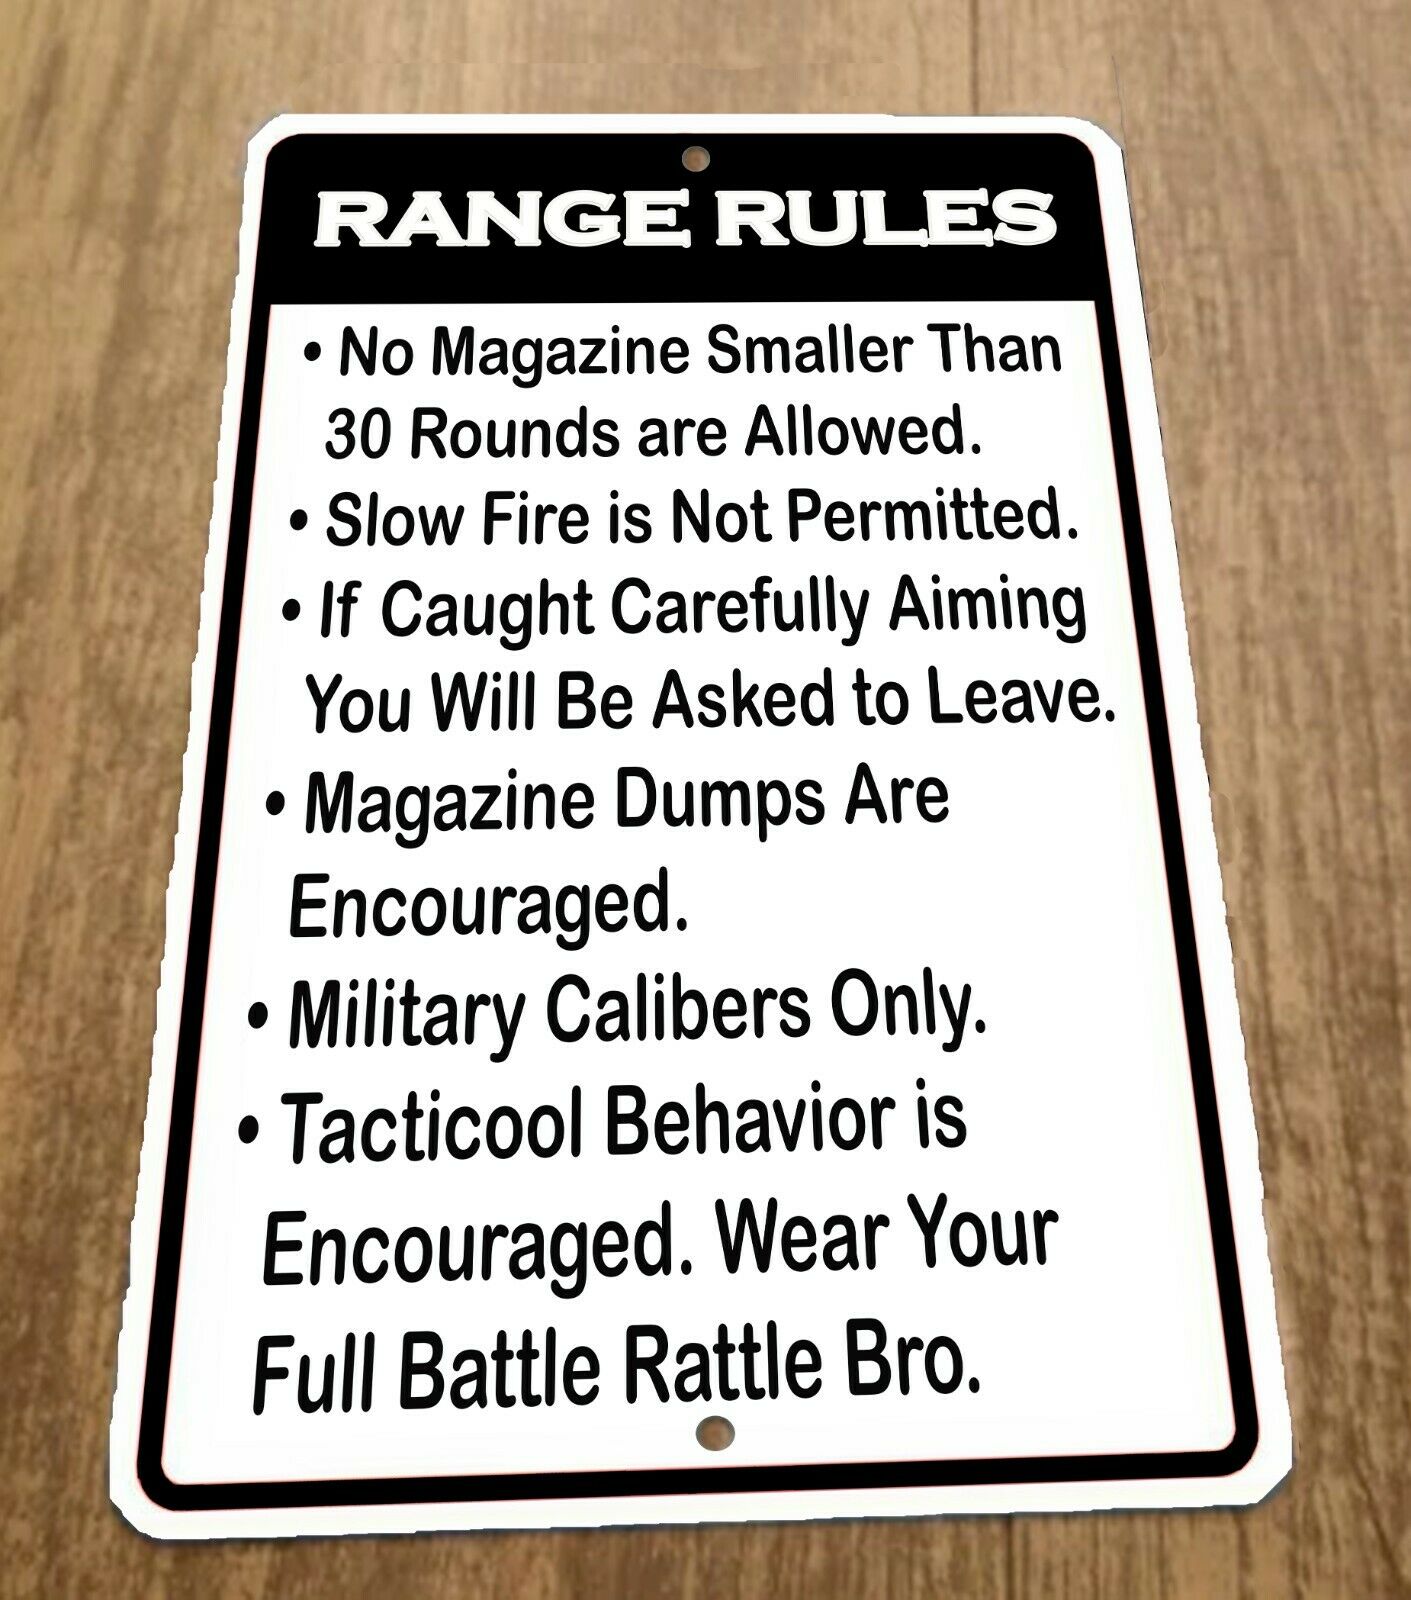 Range Rules 8x12 Metal Wall Military Sign Magazine Dumps Encouraged Full Battle Rattle Misc Poster